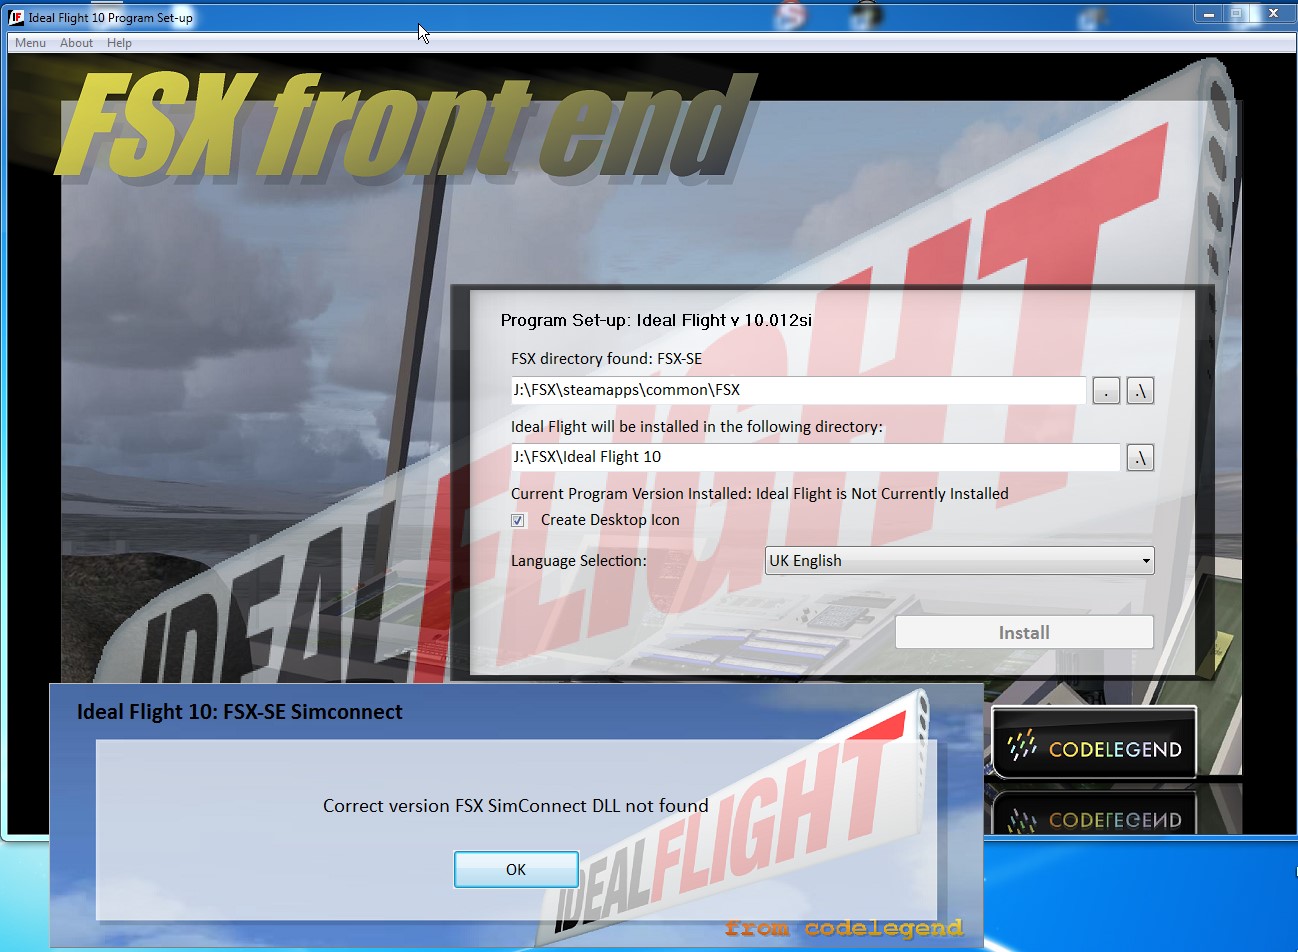 Ideal Flight install screen - correct v simconnect not found.jpg